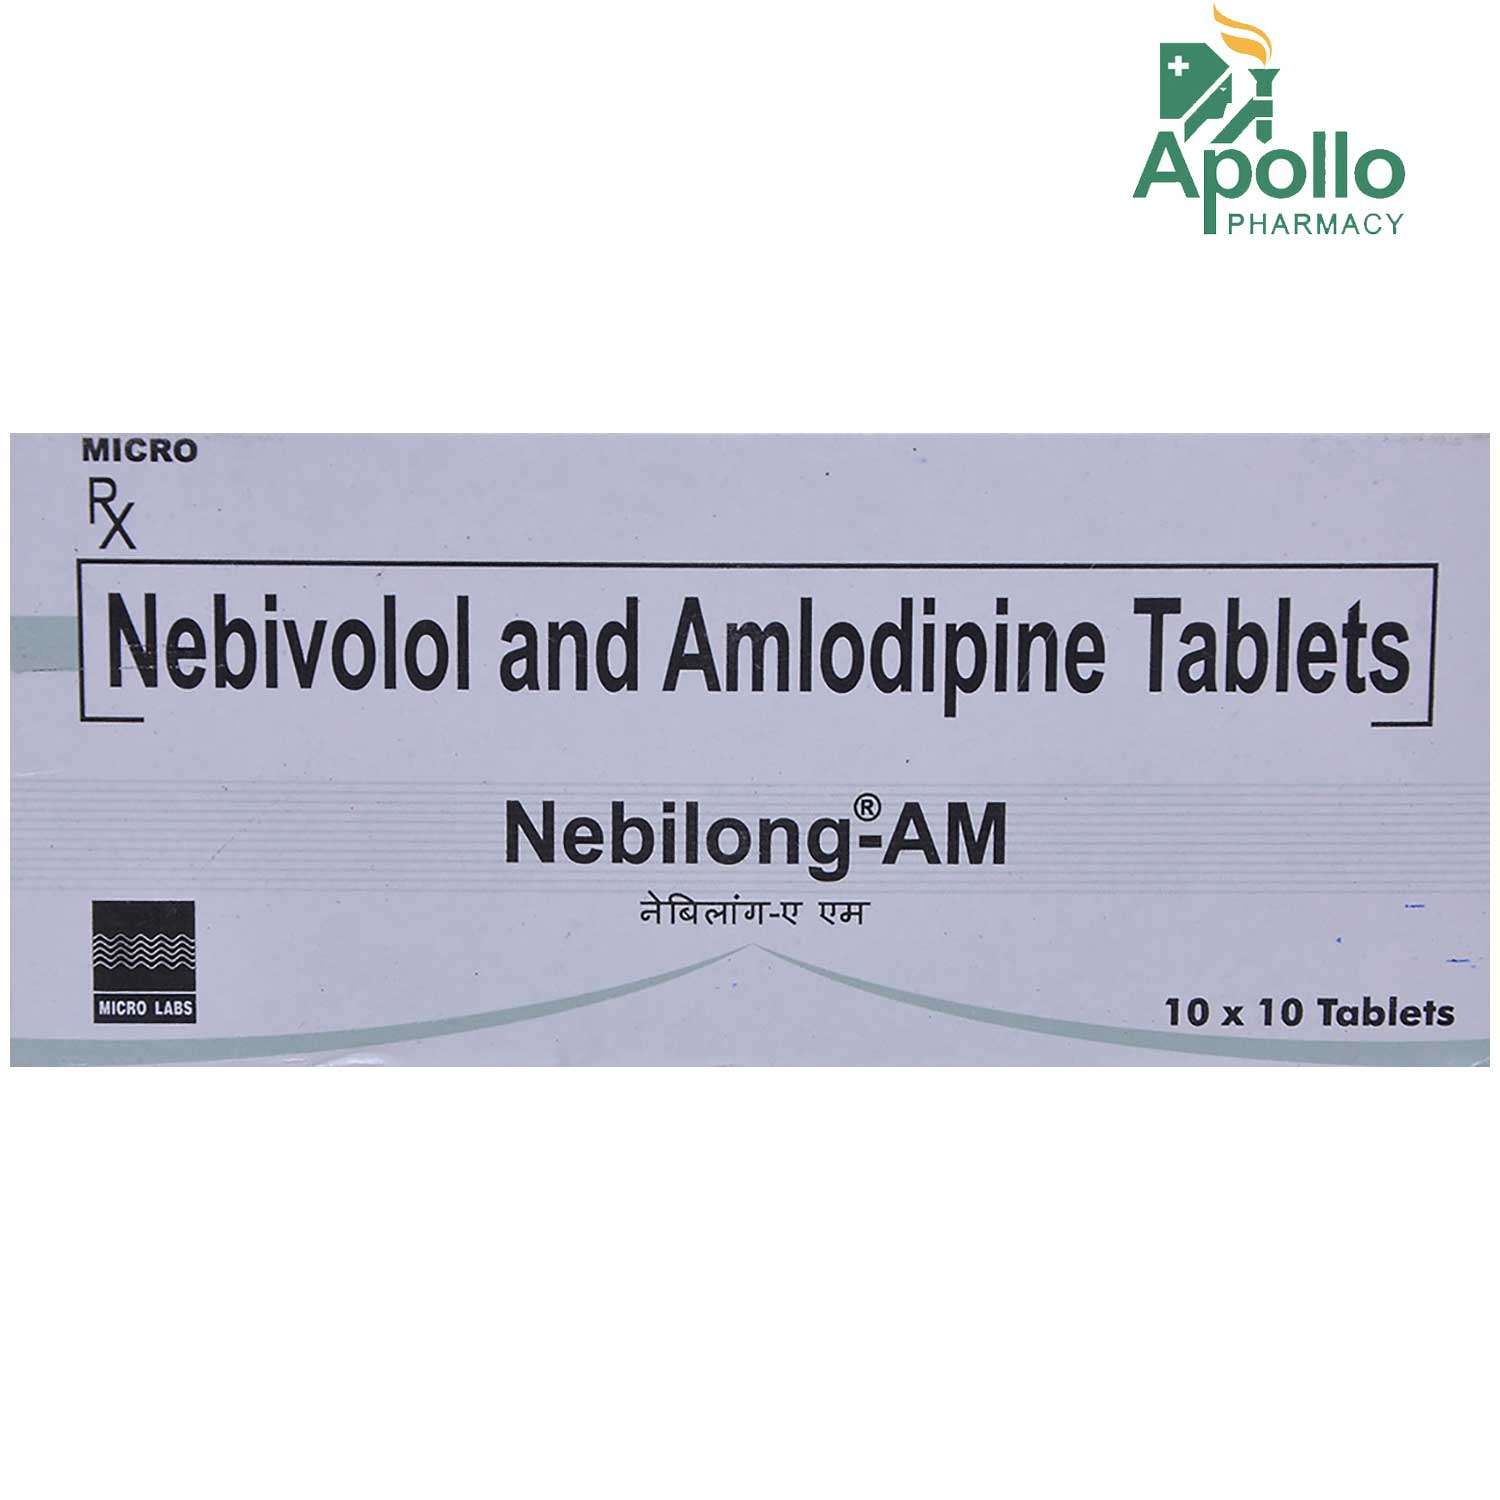 NEBULA AM TABLET Price, Uses, Side Effects, Composition - Apollo 24|7